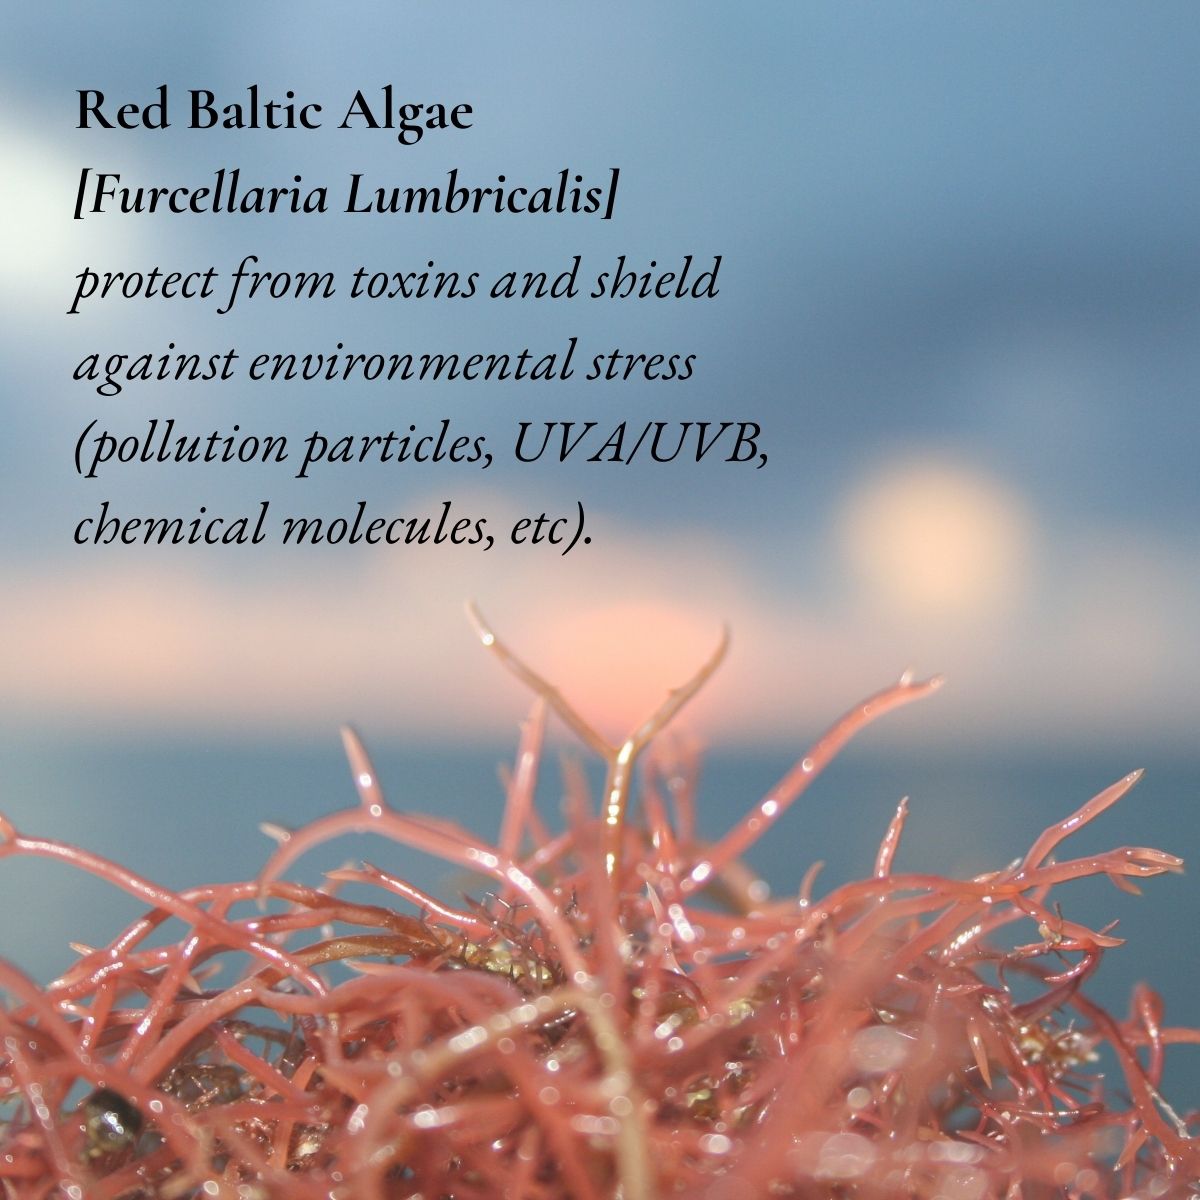 red Baltic Algae protects our skin from toxins